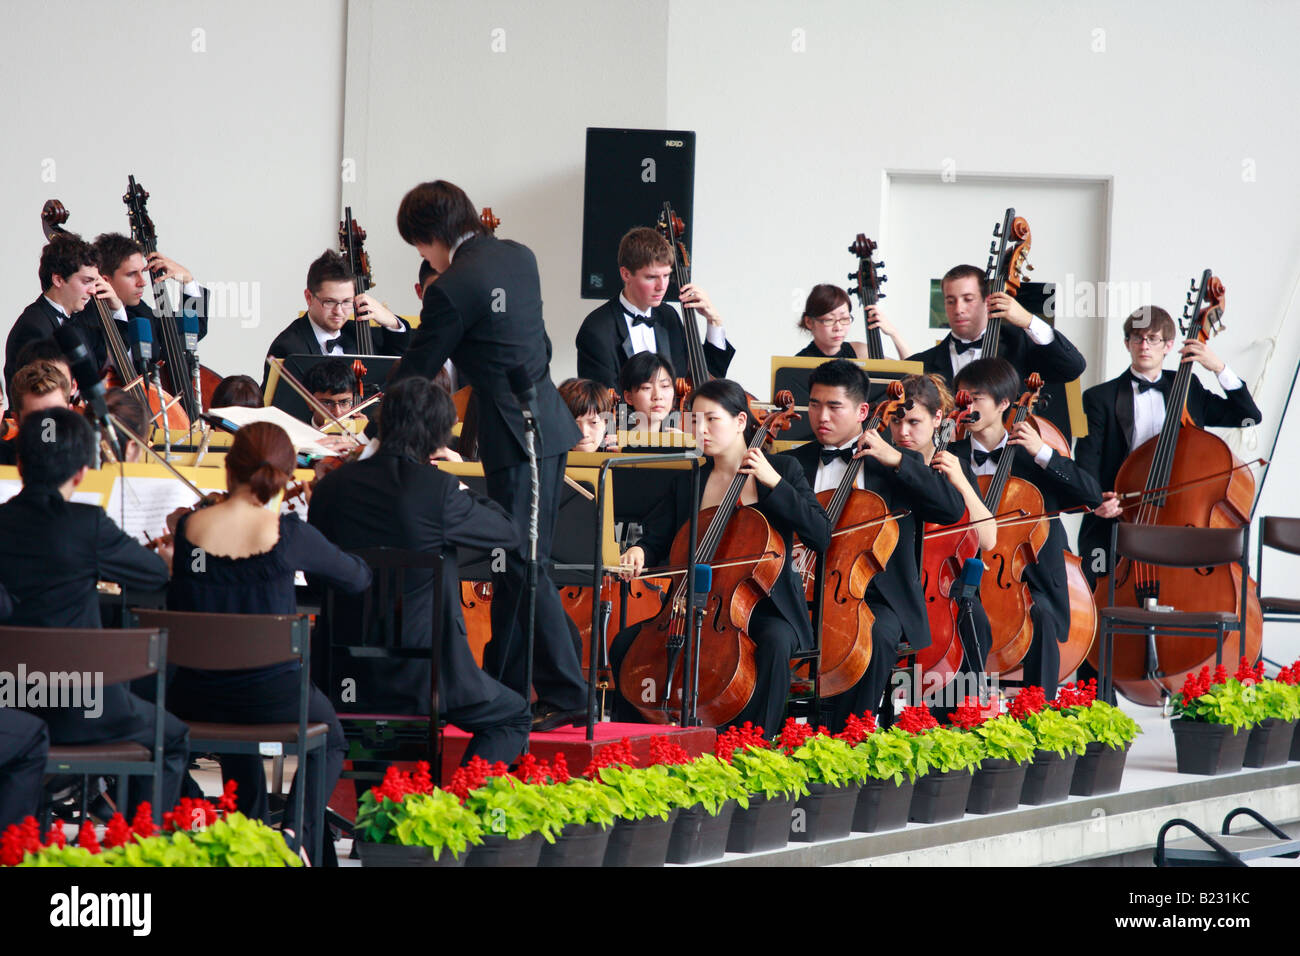 A string section of an orchestra at the Pacific Music festival in Sapporo, Japan. Stock Photo